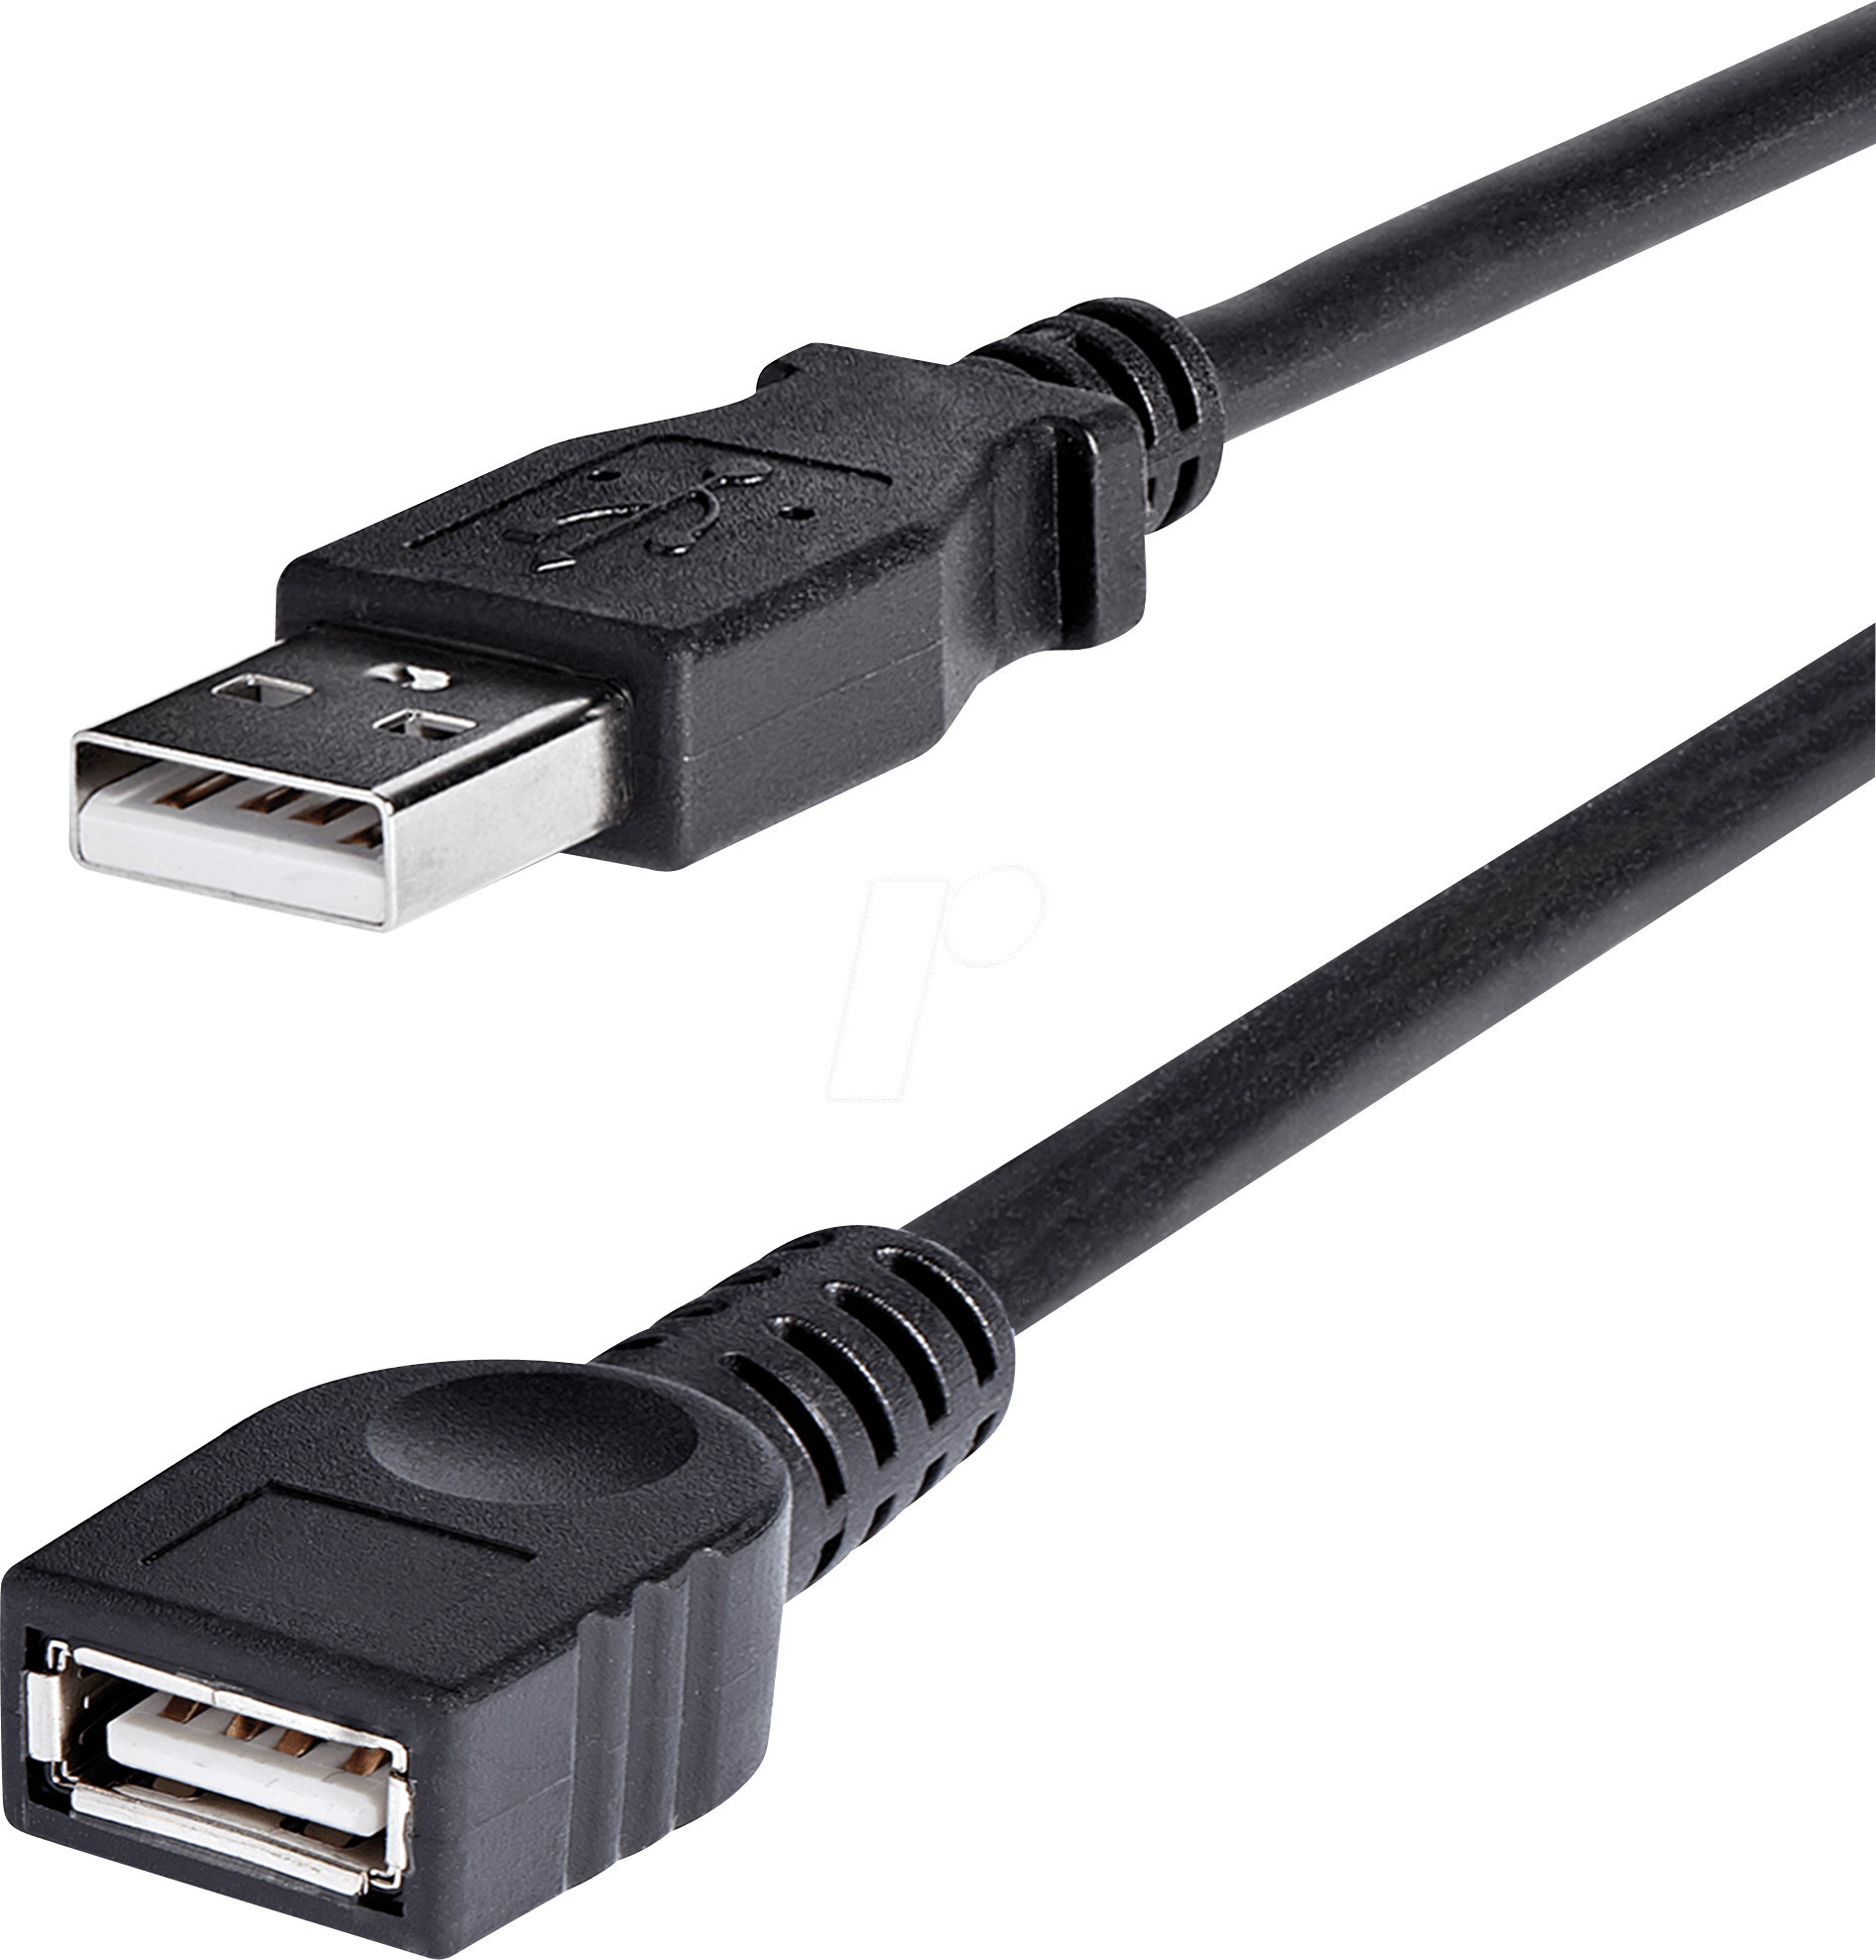 Lysee Data Cables Male to Female Extension Extend USB Retractable Cord Cable for Laptop Computer 